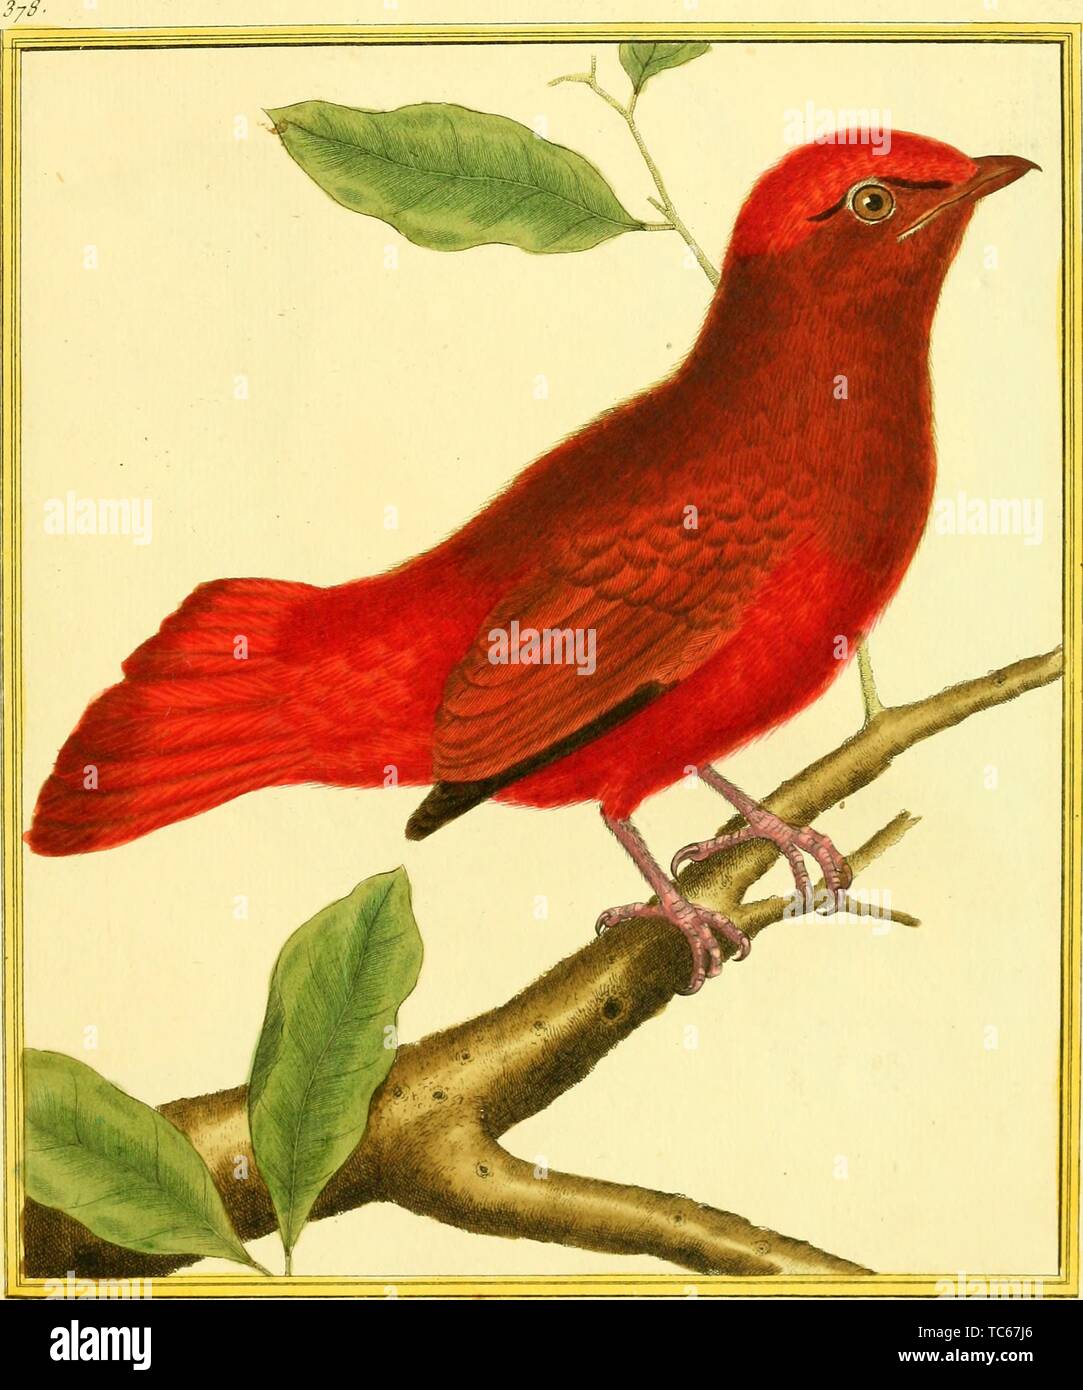 Engraved drawing of the Guianan Red Cotinga (Phoenicircus carnifex), from the book 'Planches enluminees Dhistoire naturelle' by Francois Nicolas, Louis Jean Marie Daubenton, and Edme-Louis Daubenton, 1765. Courtesy Internet Archive. () Stock Photo